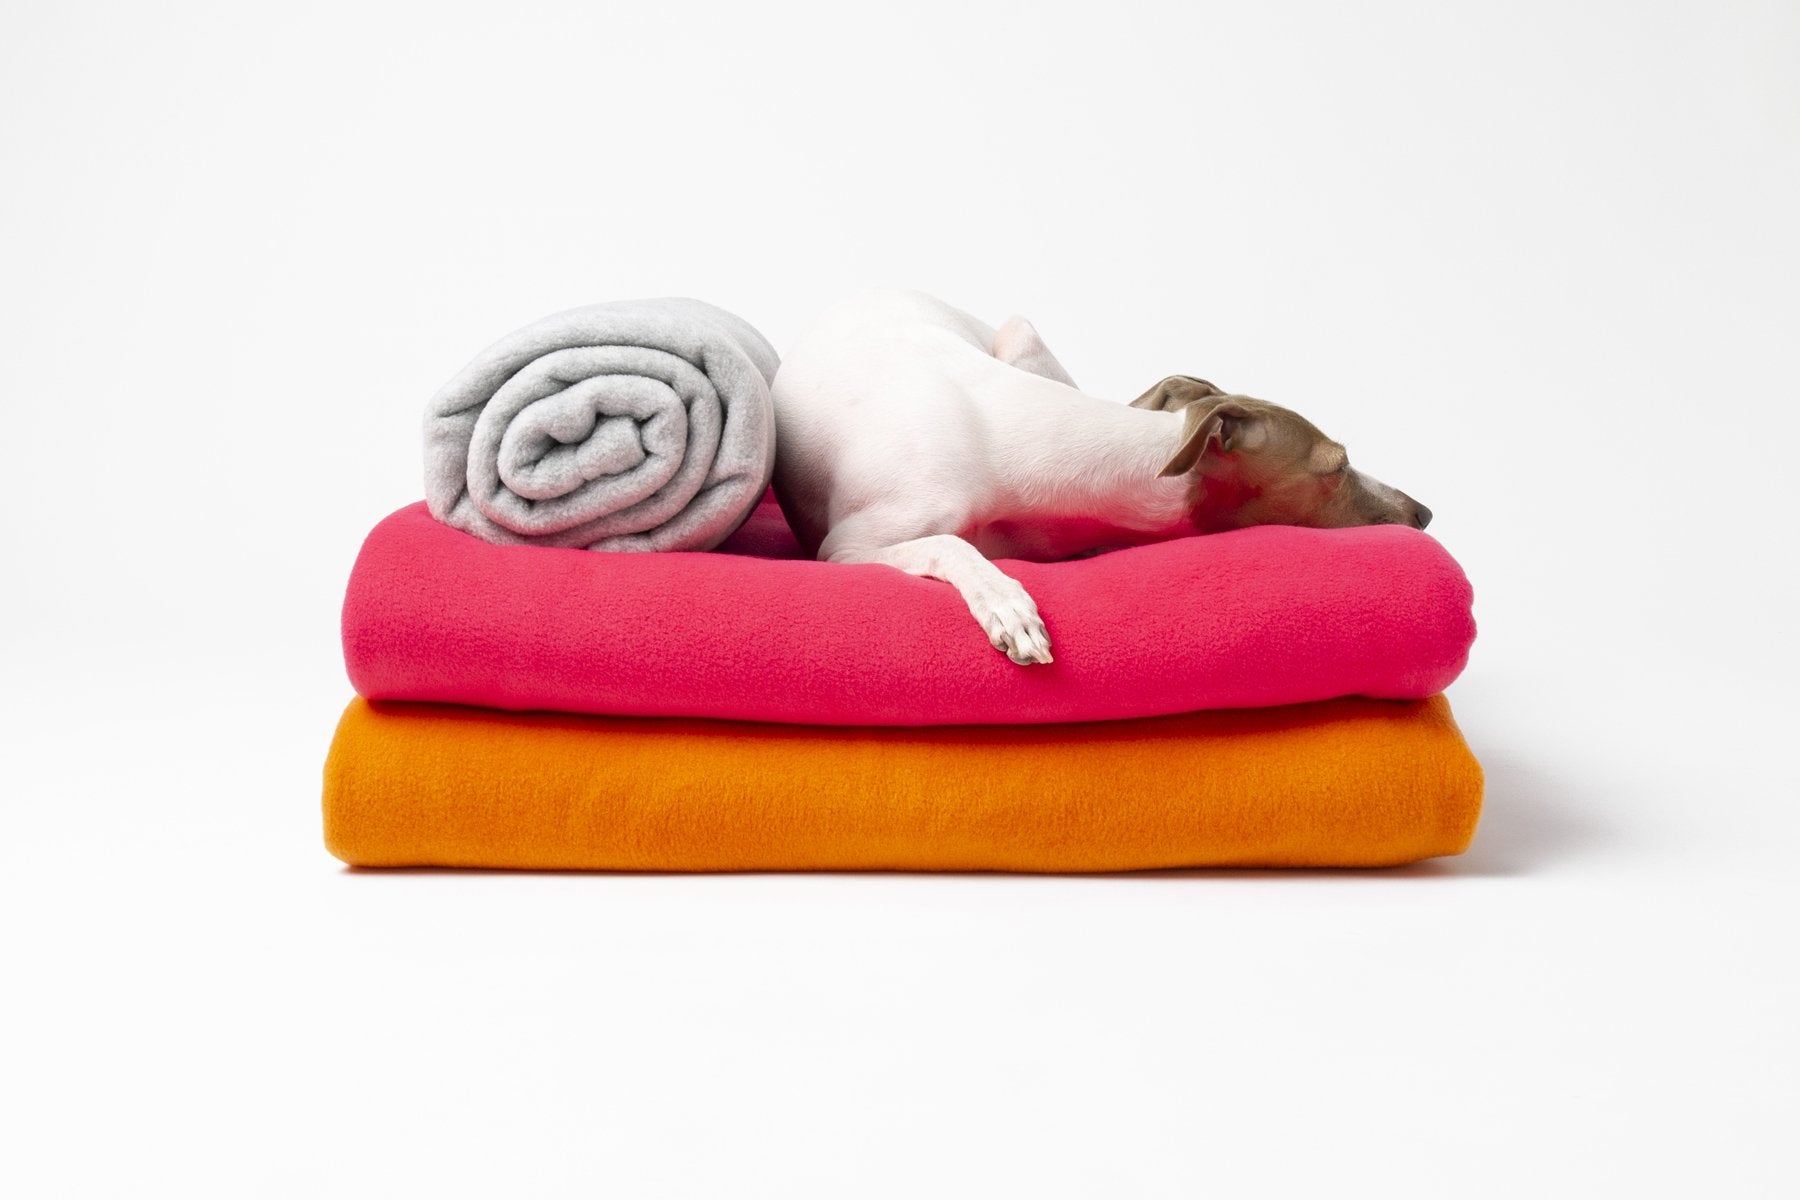 New for A/W 2019 – Double Fleece Dog Blankets in Wisp Grey, Hot Pink and Bright Orange